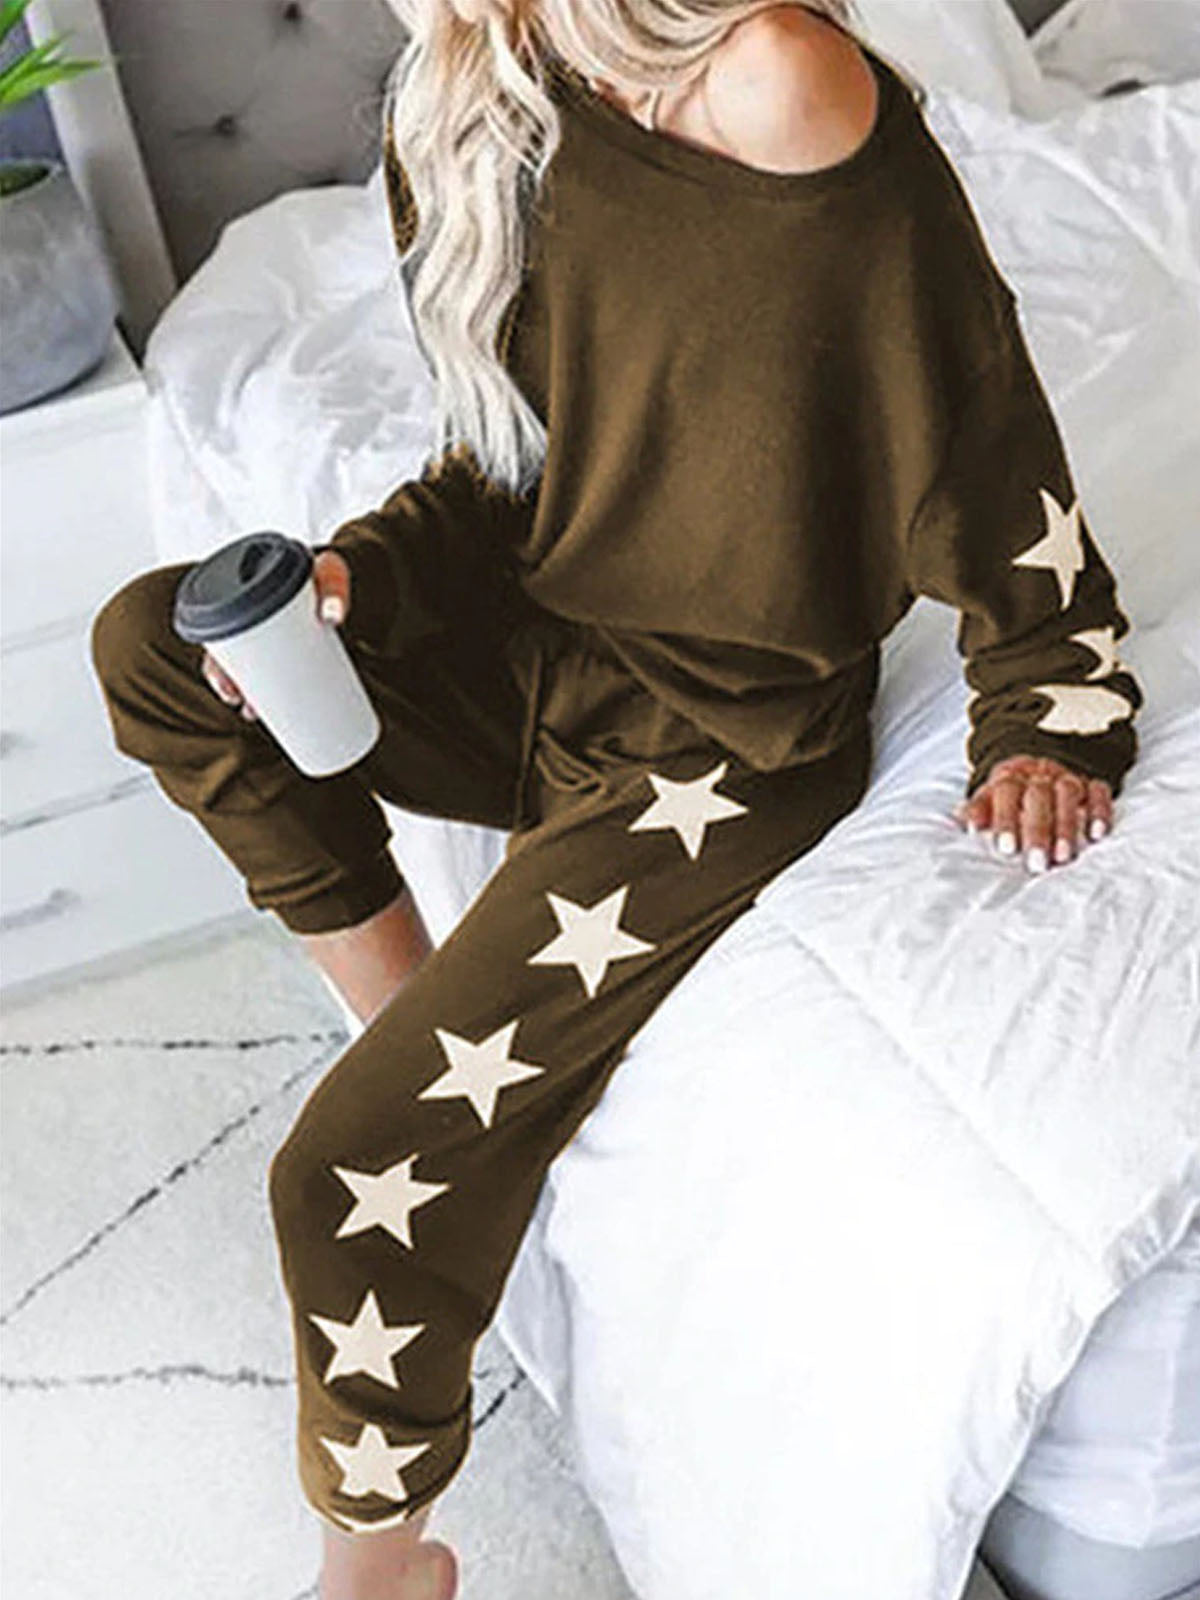 Women's Star Print Loose Lounge Top with Matching Jogger Pants